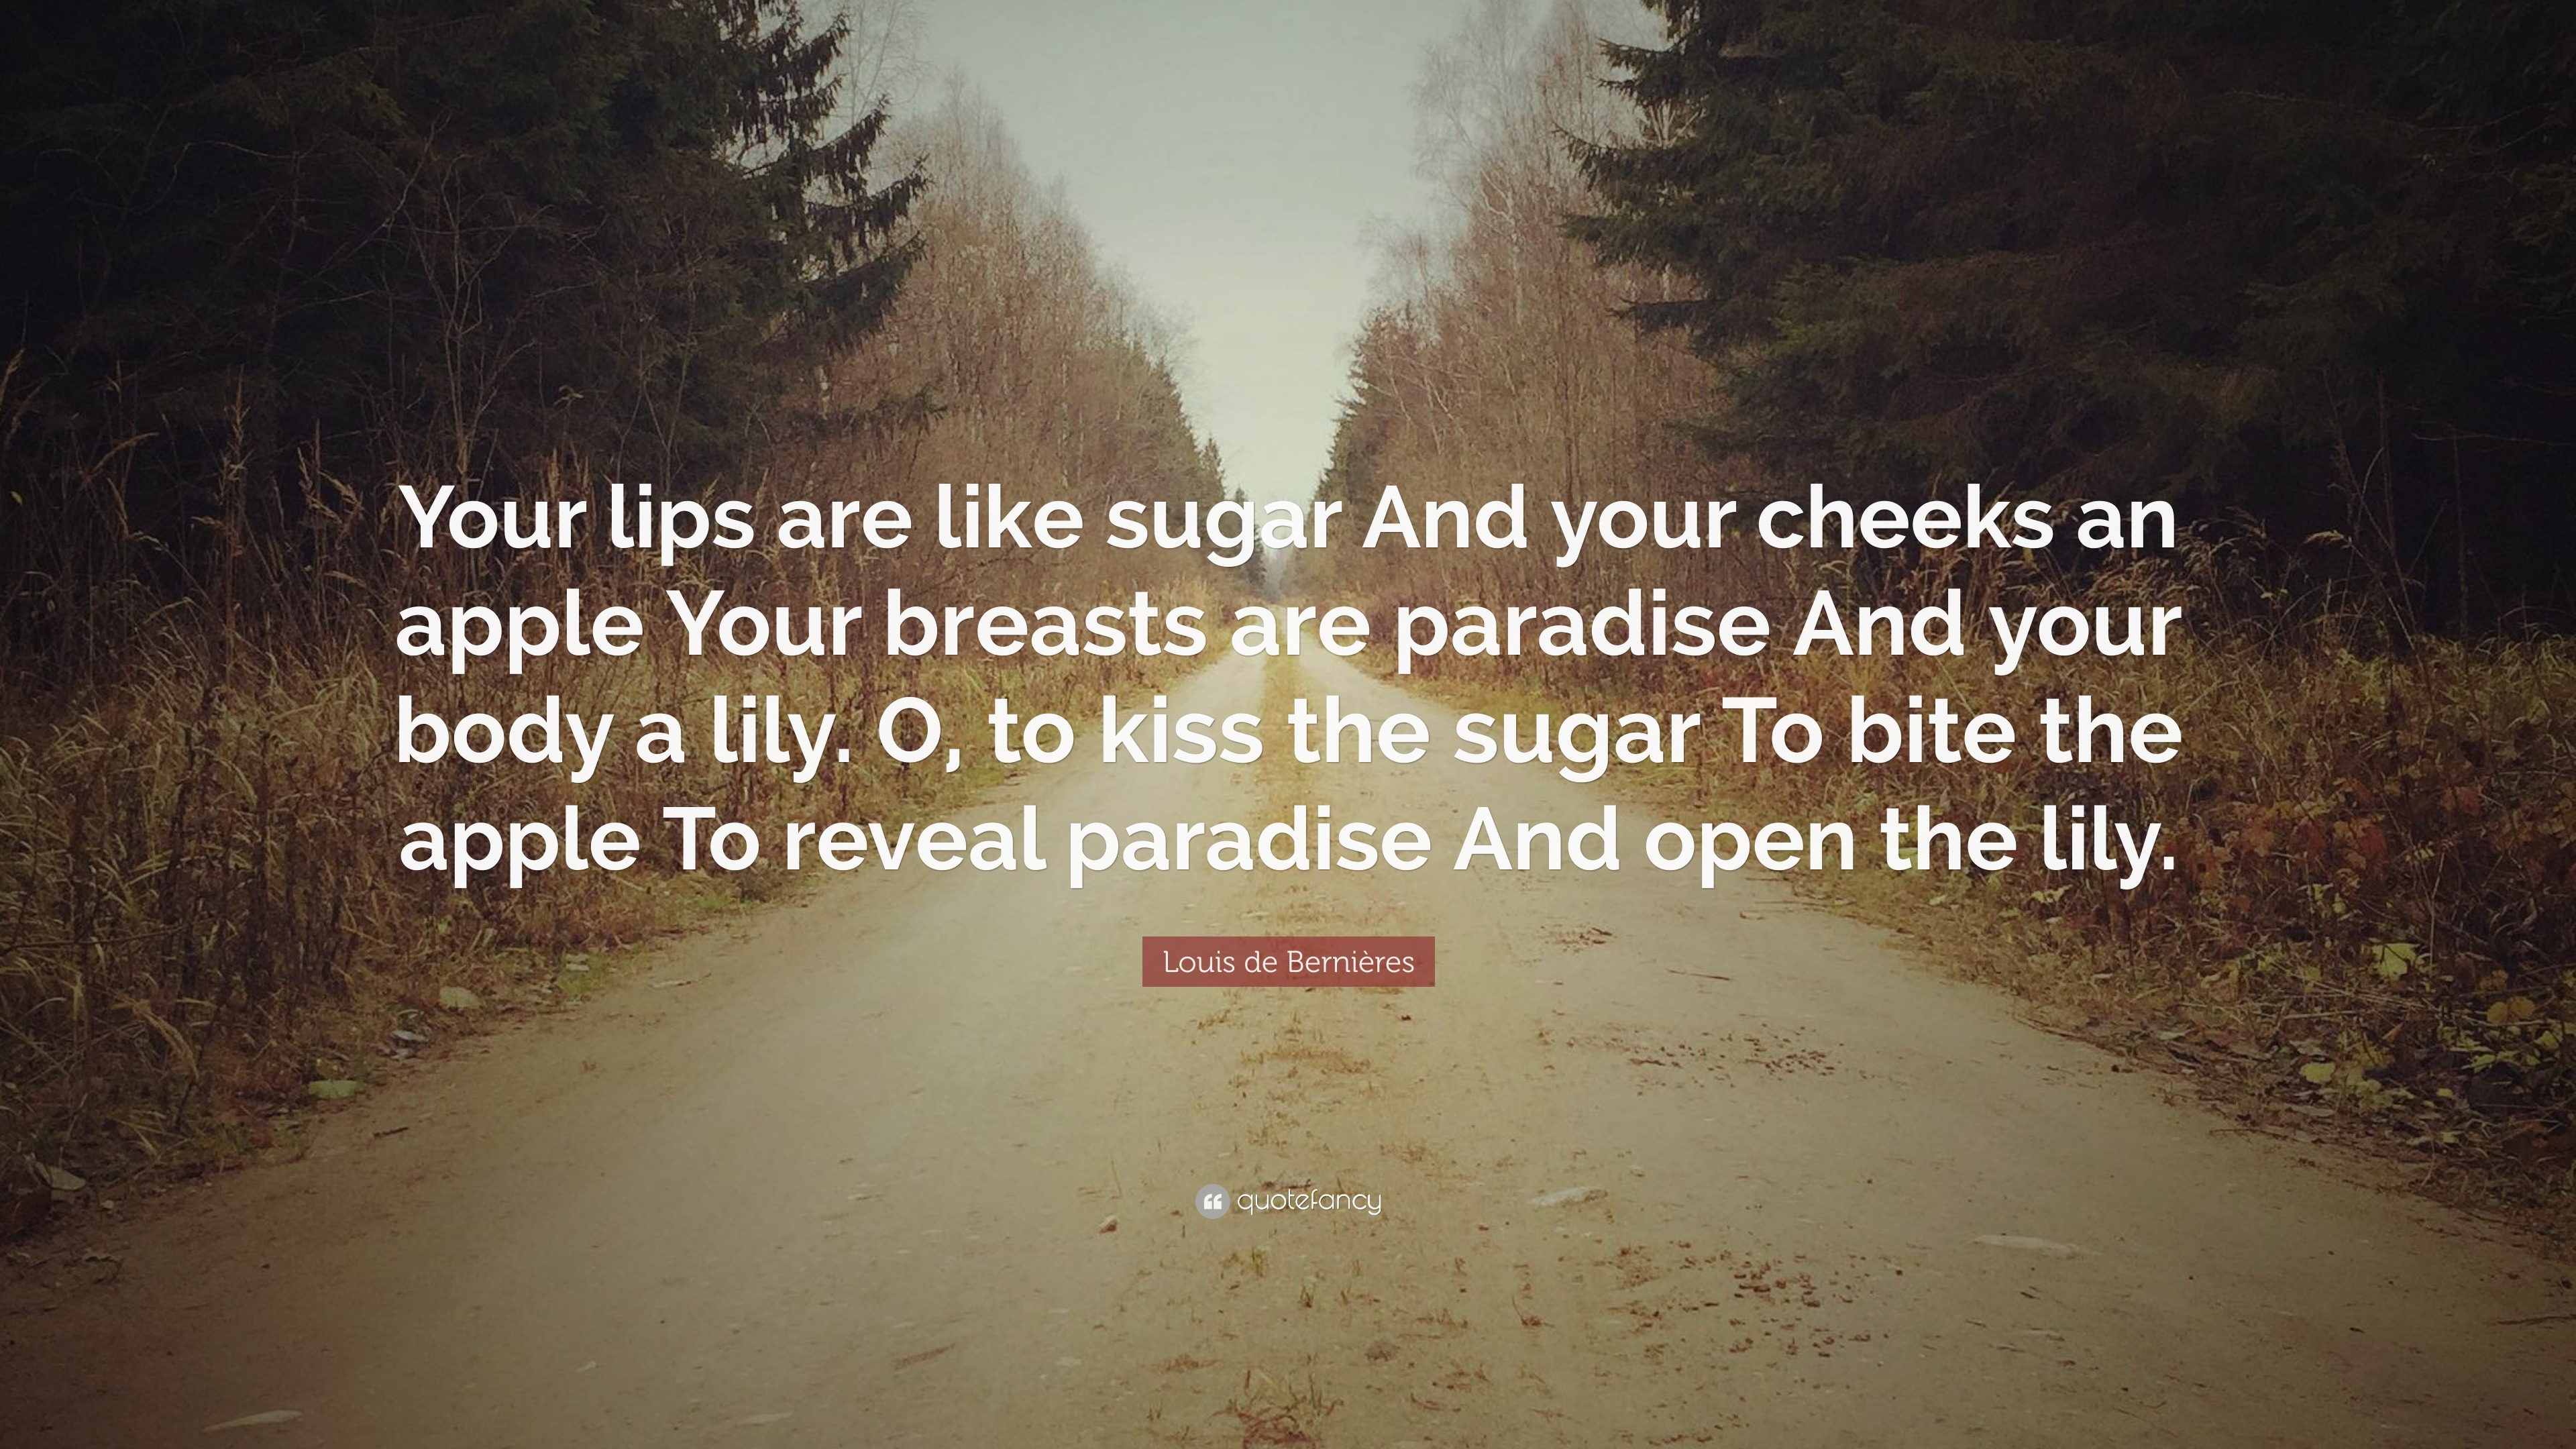 https://quotefancy.com/media/wallpaper/3840x2160/851220-Louis-de-Berni-res-Quote-Your-lips-are-like-sugar-And-your-cheeks.jpg